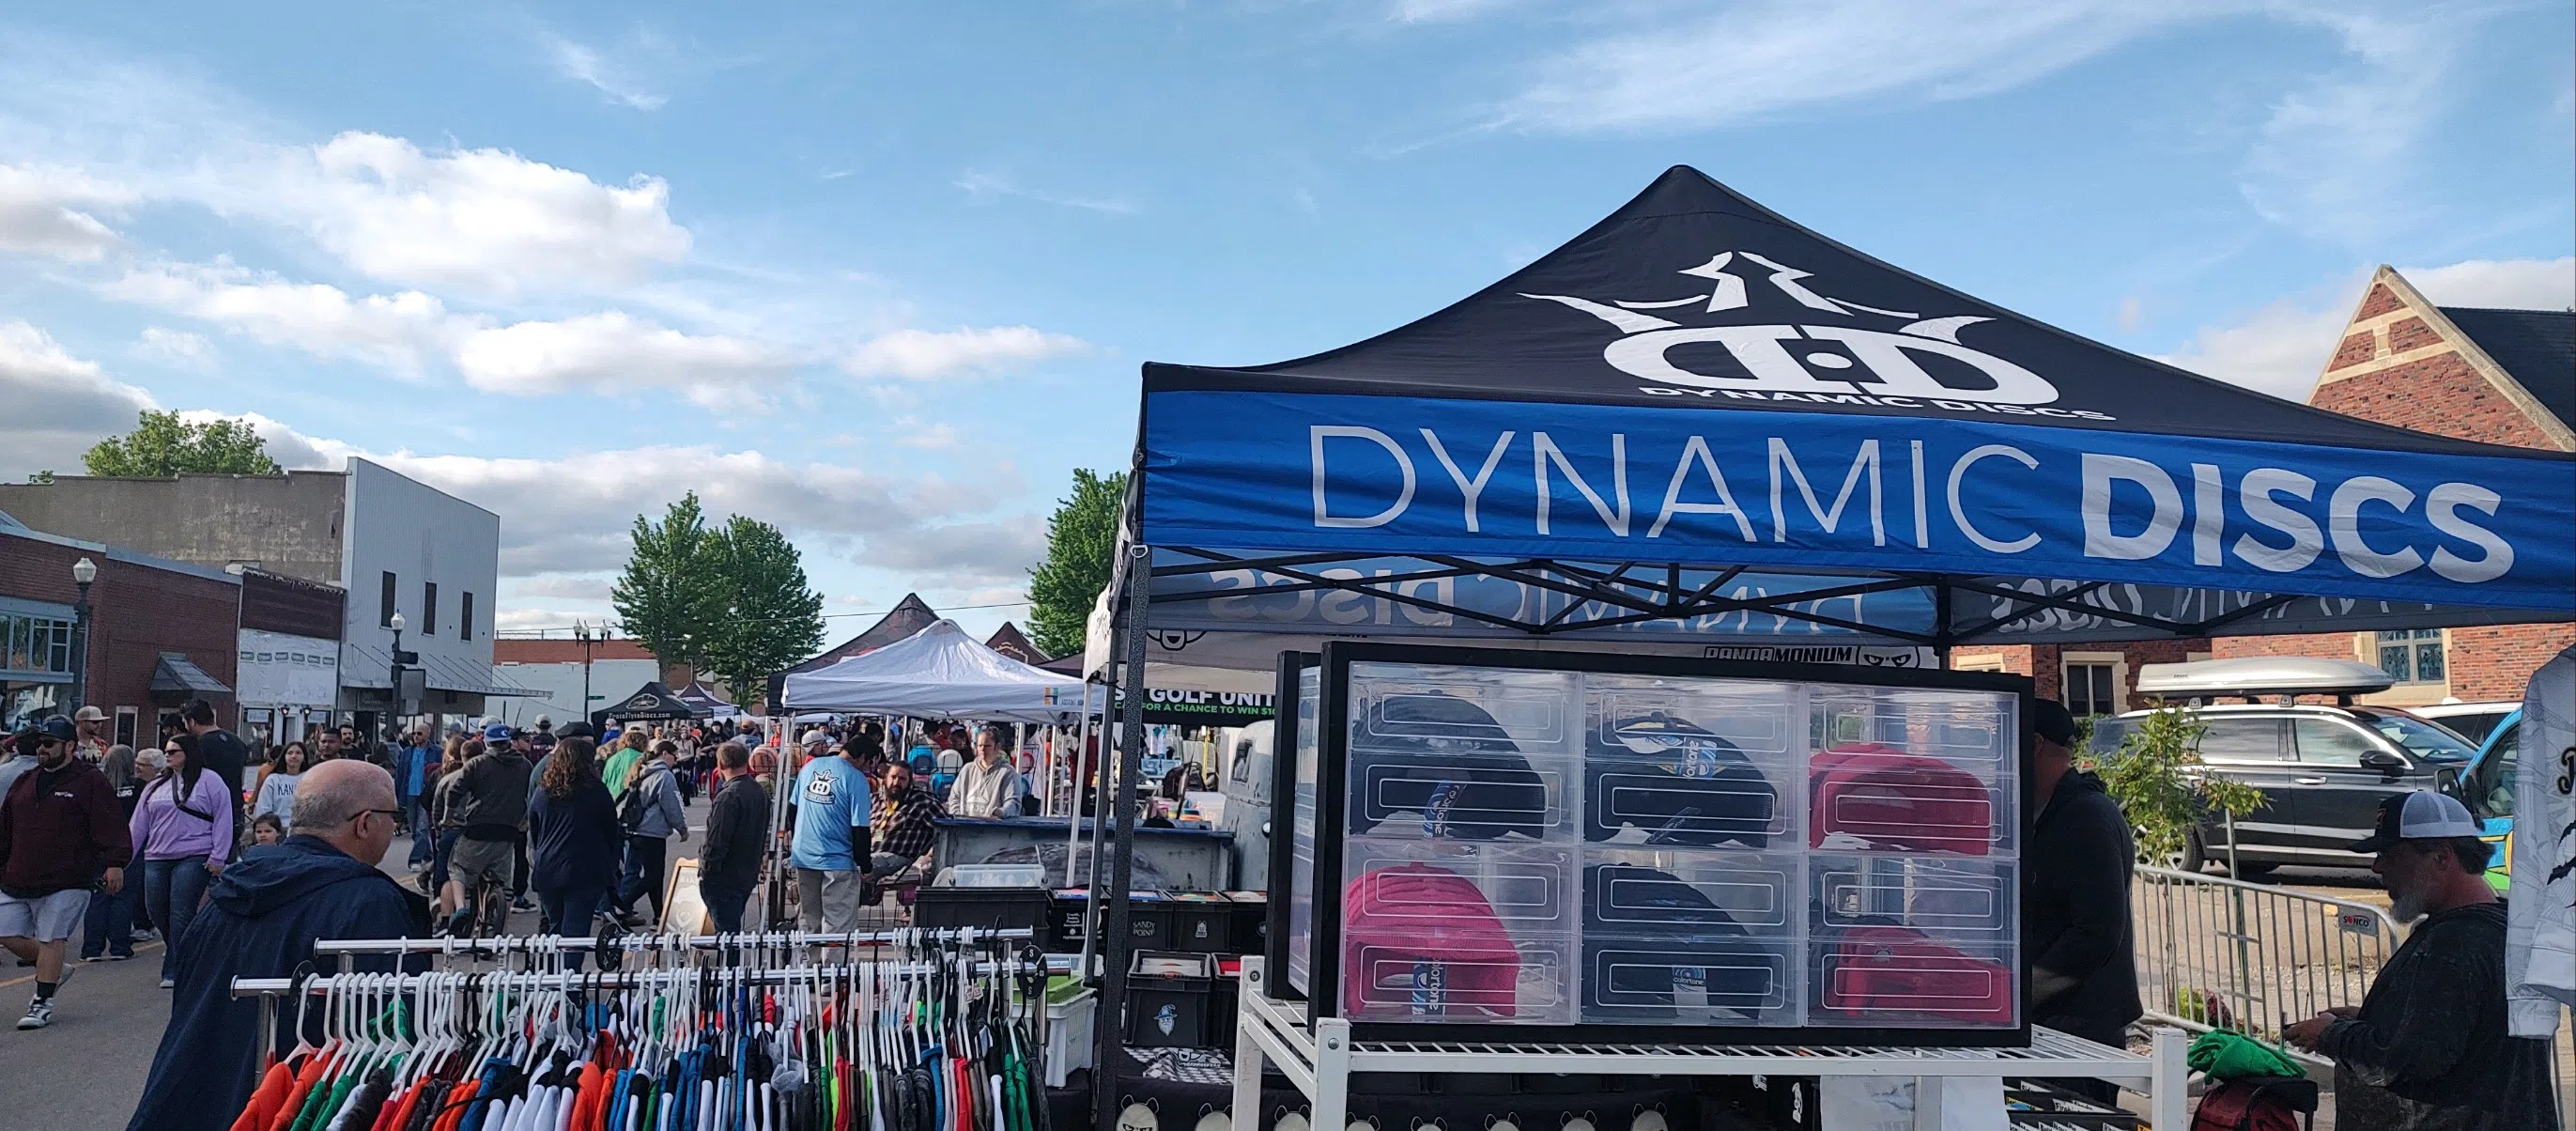 City of Emporia receives high praise for its hospitality and activities during 2024 Dynamic Discs Open block party Saturday